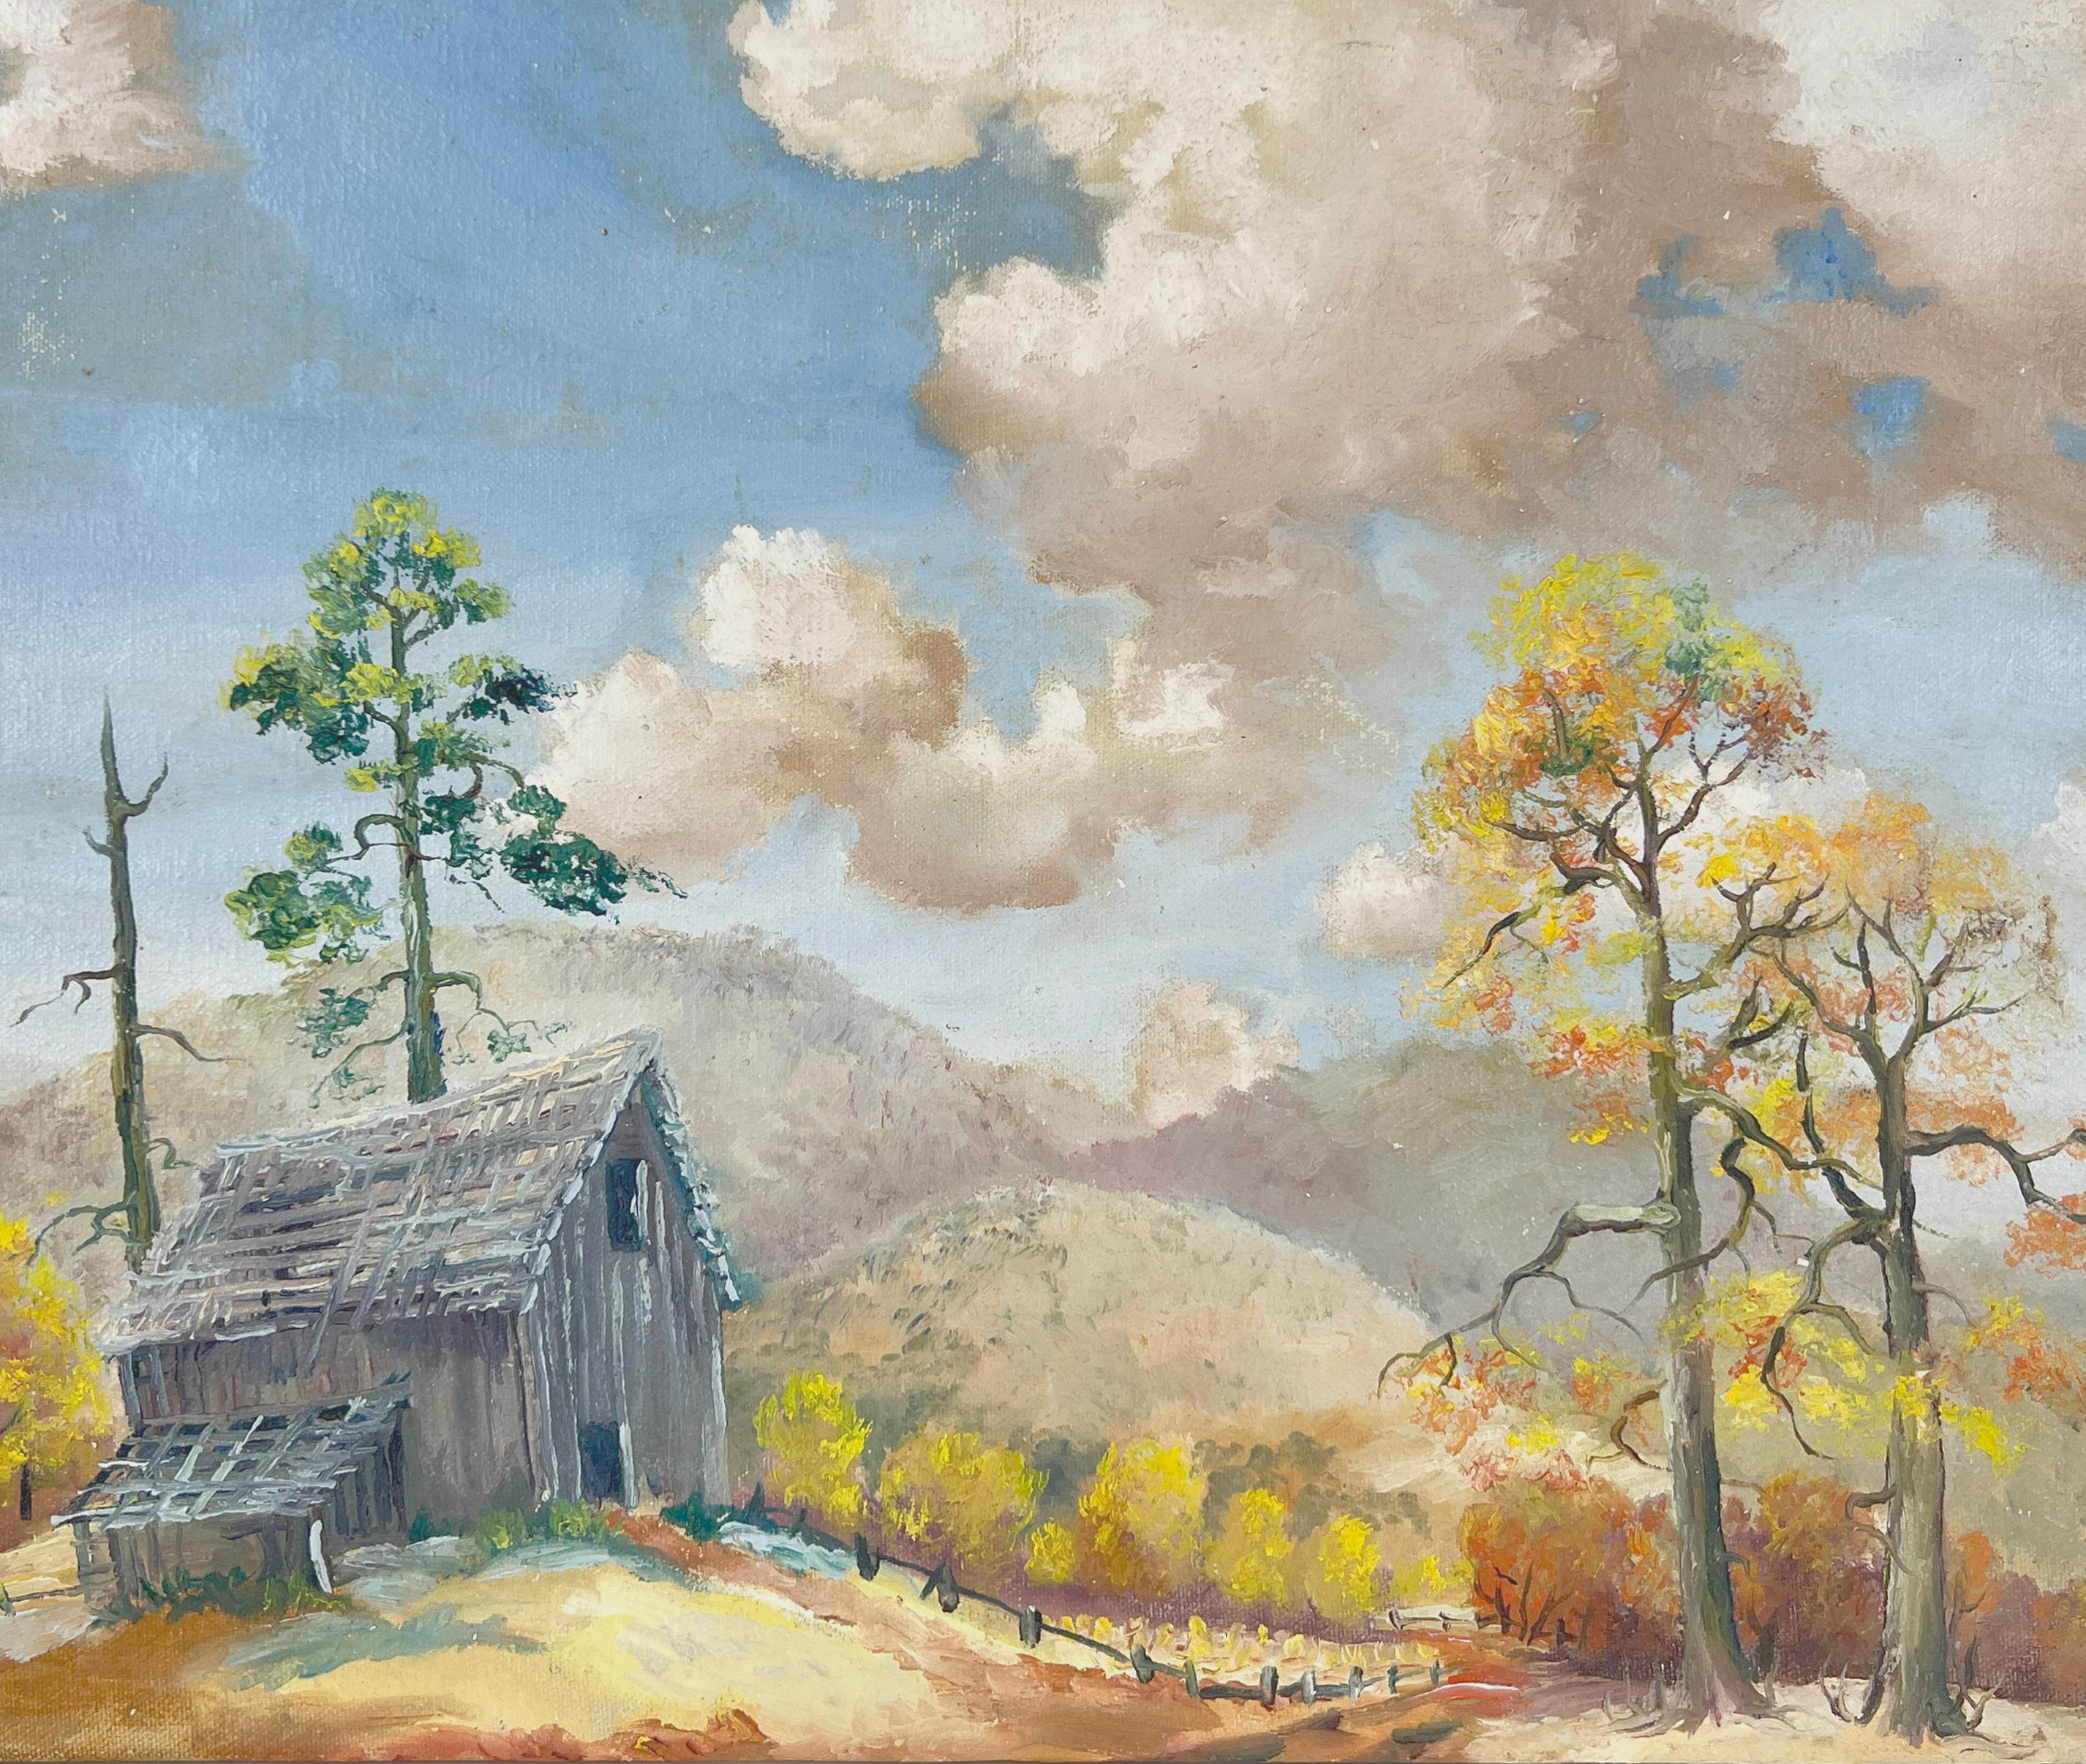 Fall in the California Foothills Original Oil Painting 1950s

Well executed California Oil painting of the Lower Foothills near Santa Cruz, California by an unknown artist (American, late 19th C.) Impasto brush work of billowing clouds on a fall